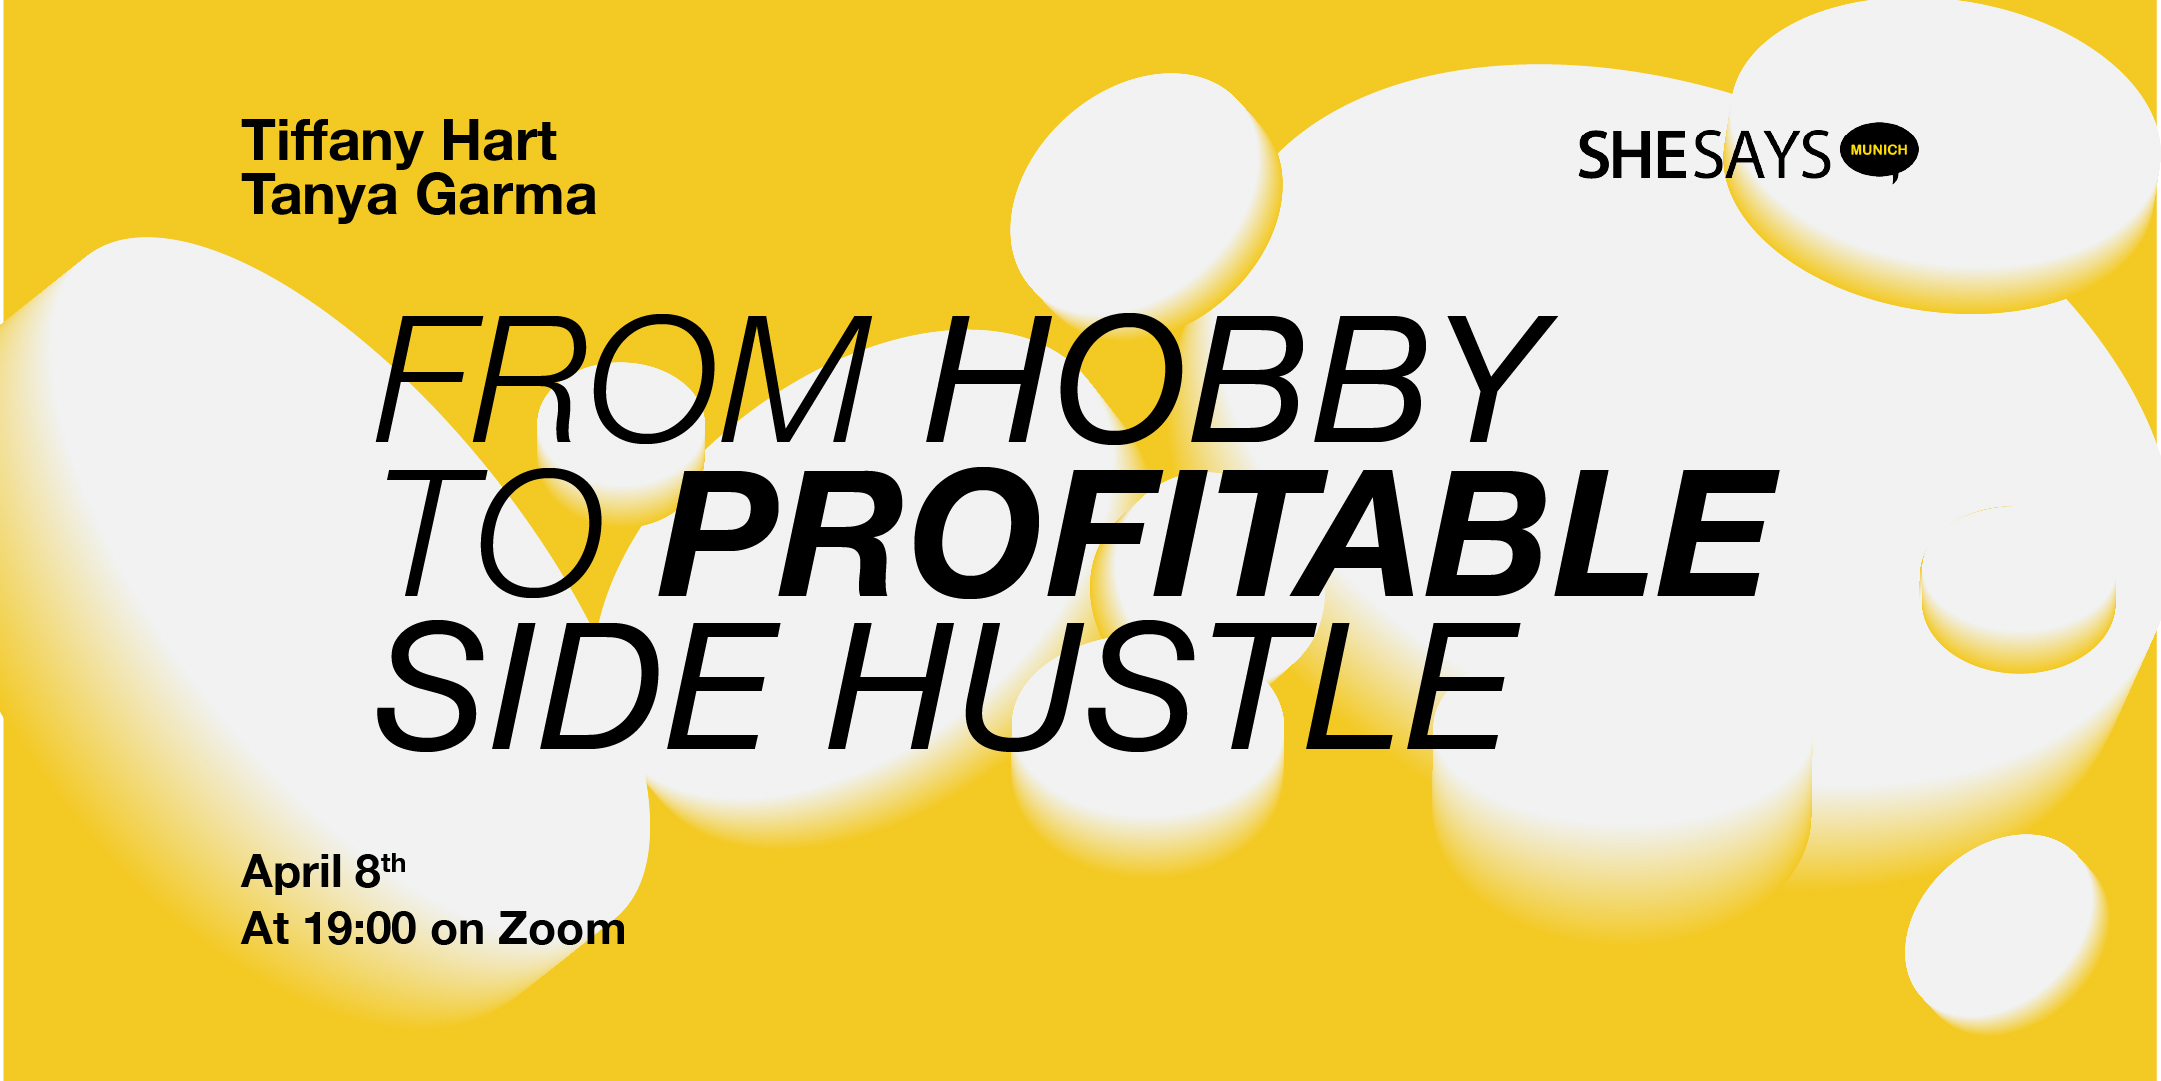 From hobby to hustle: how to turn your passion into a profitable side gig